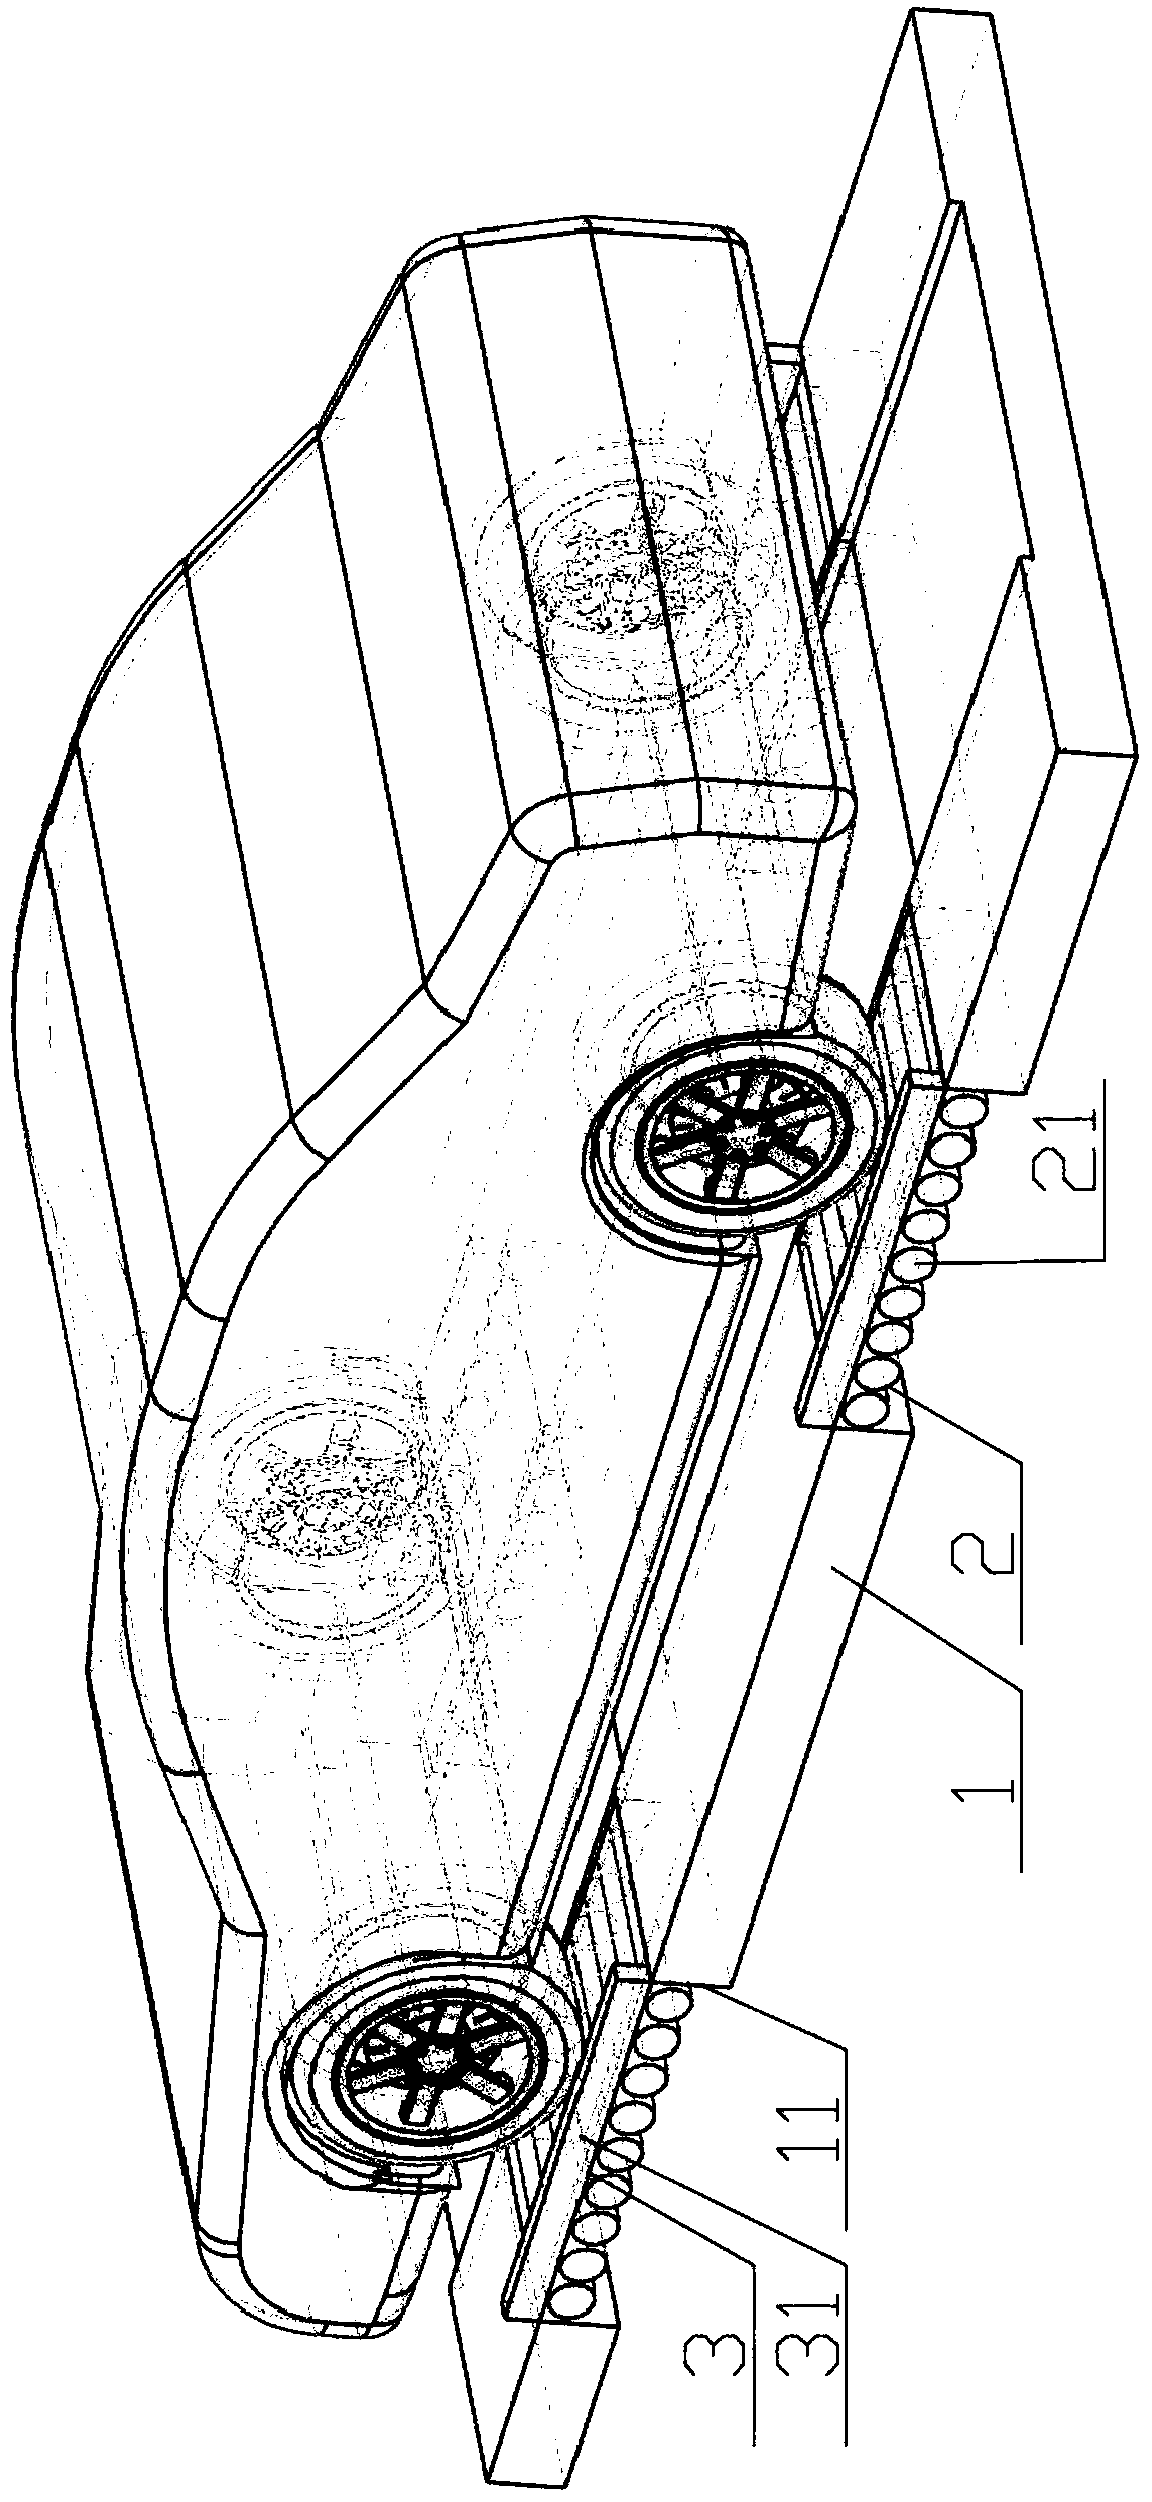 Automobile auxiliary aligning device